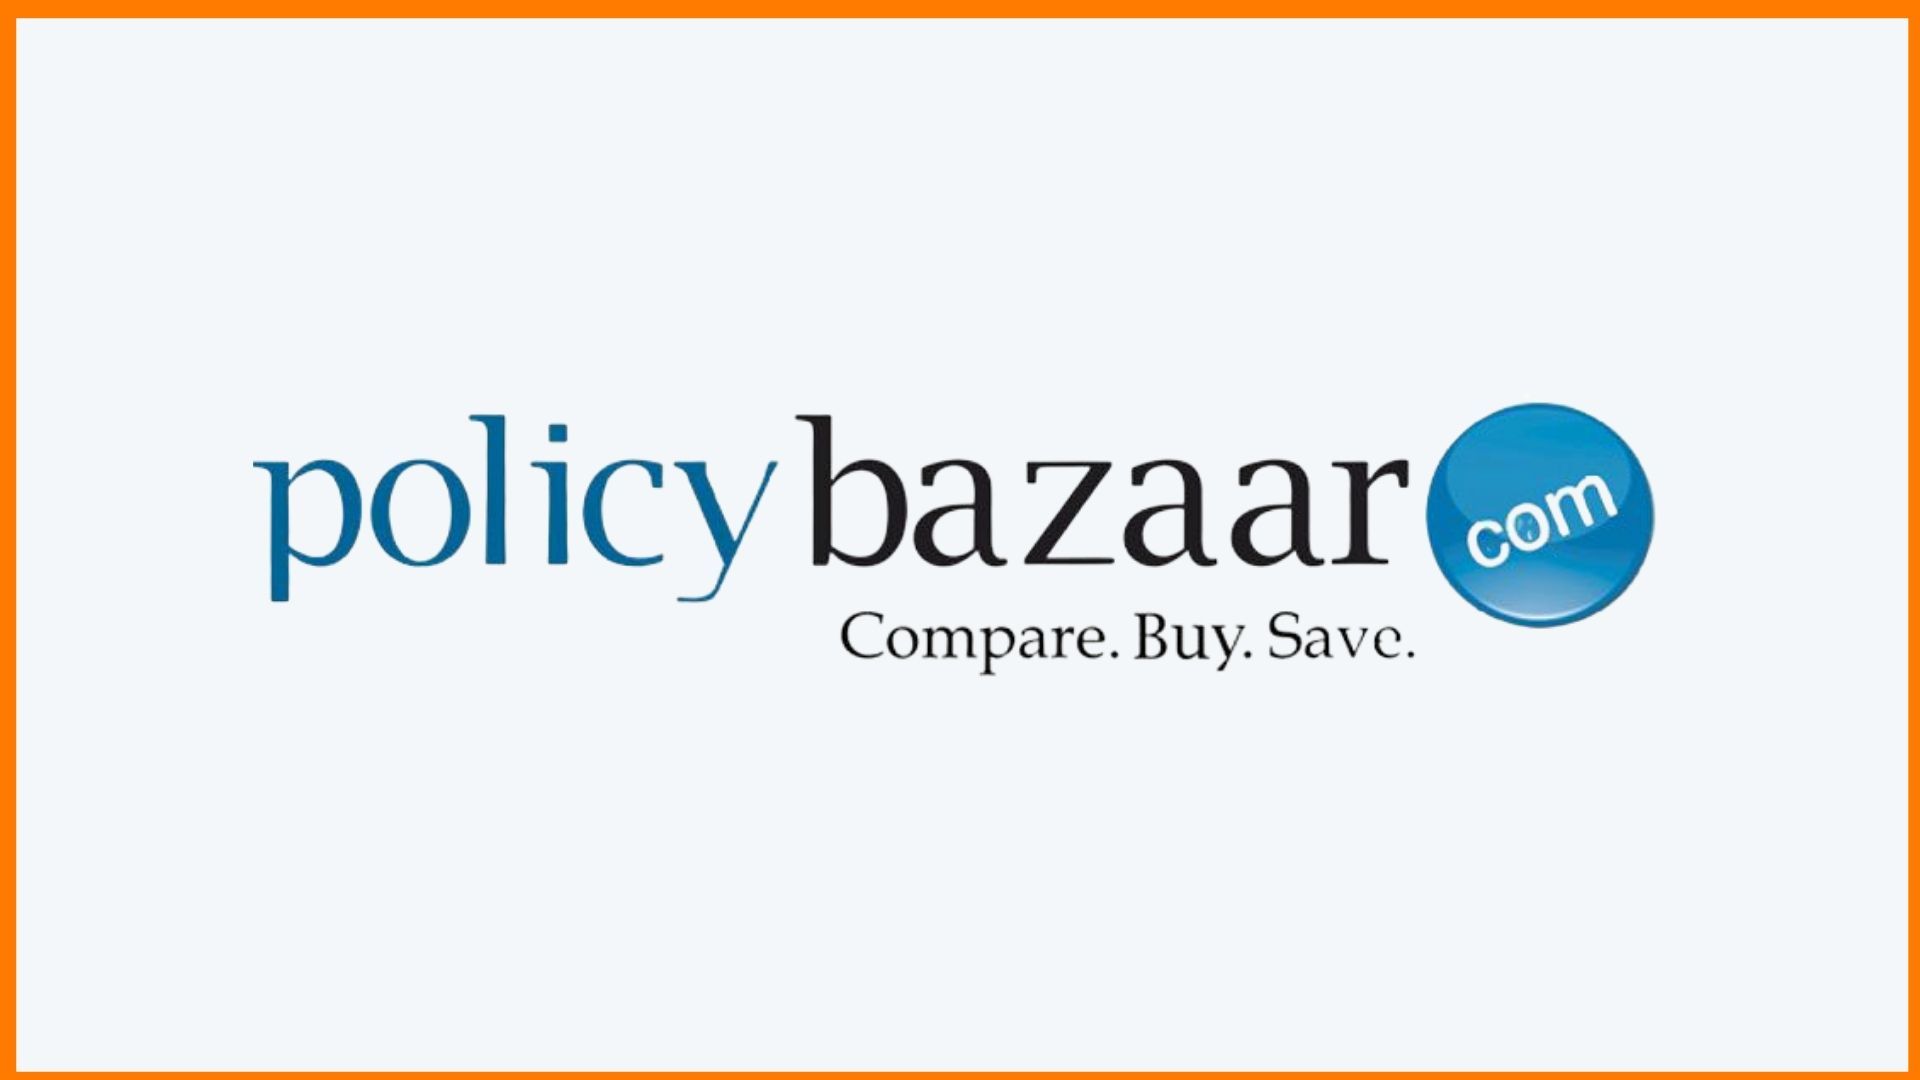 PolicyBazaar - India's Prominent Online Life Insurance and General Insurance Aggregator!